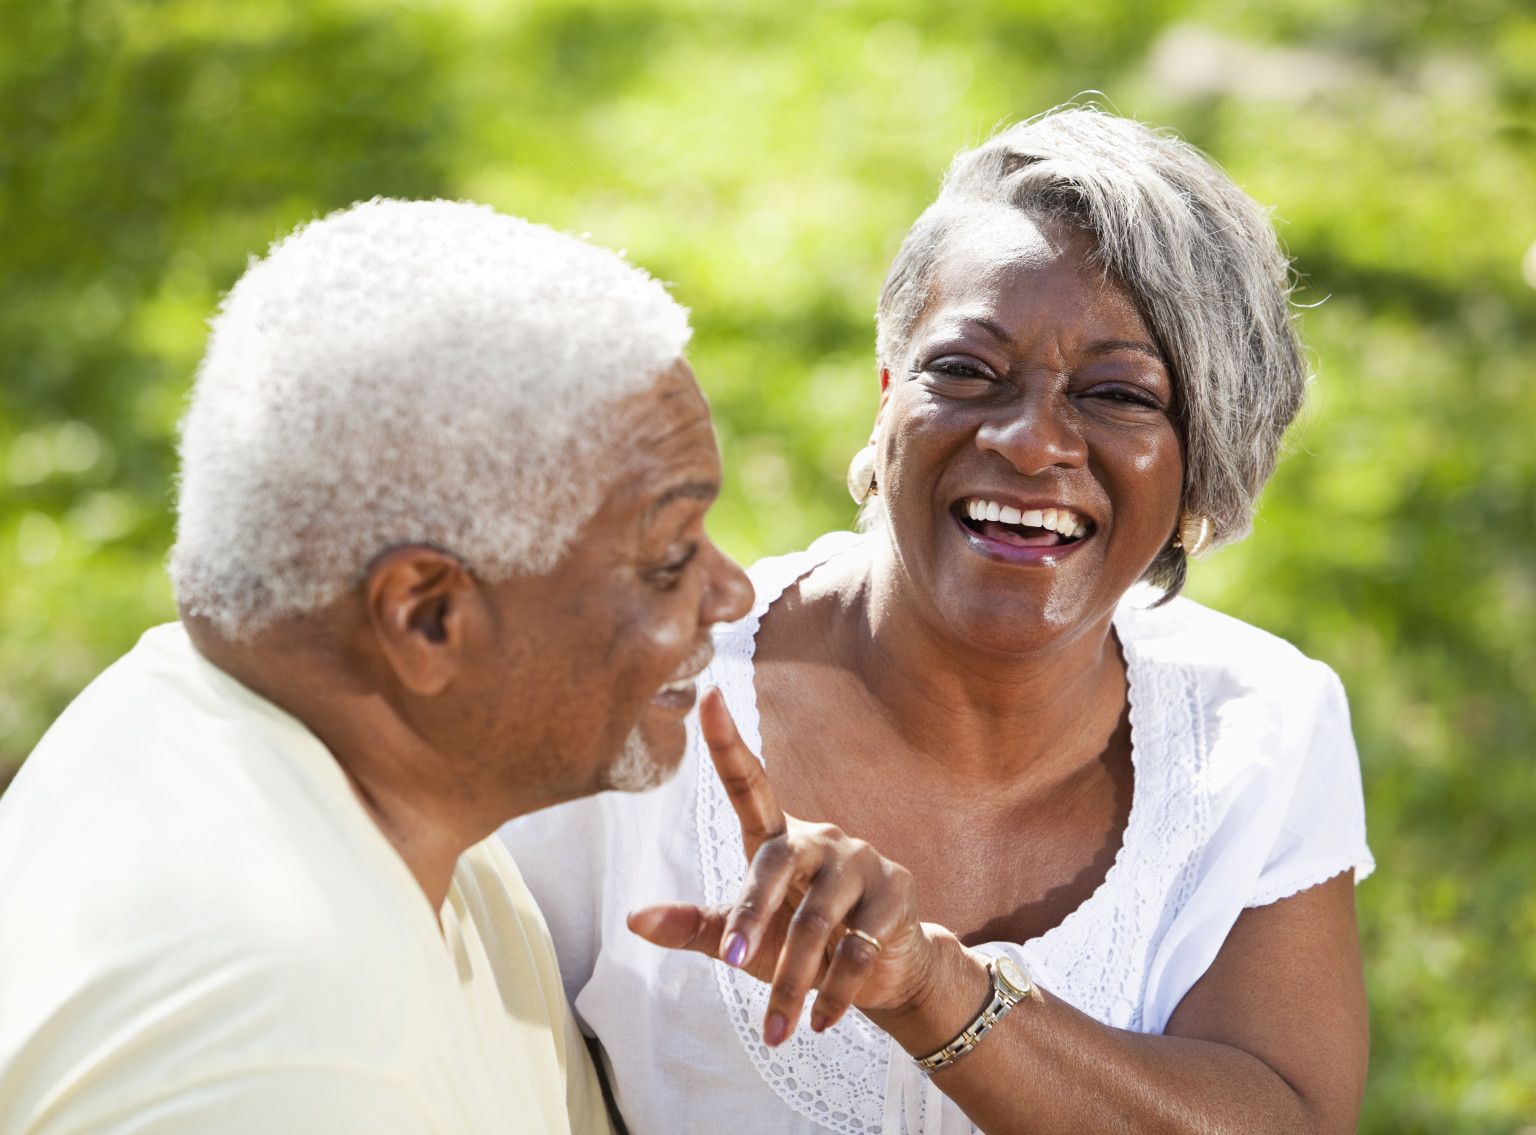 The 14 best things about growing old together - Citi 97.3 FM